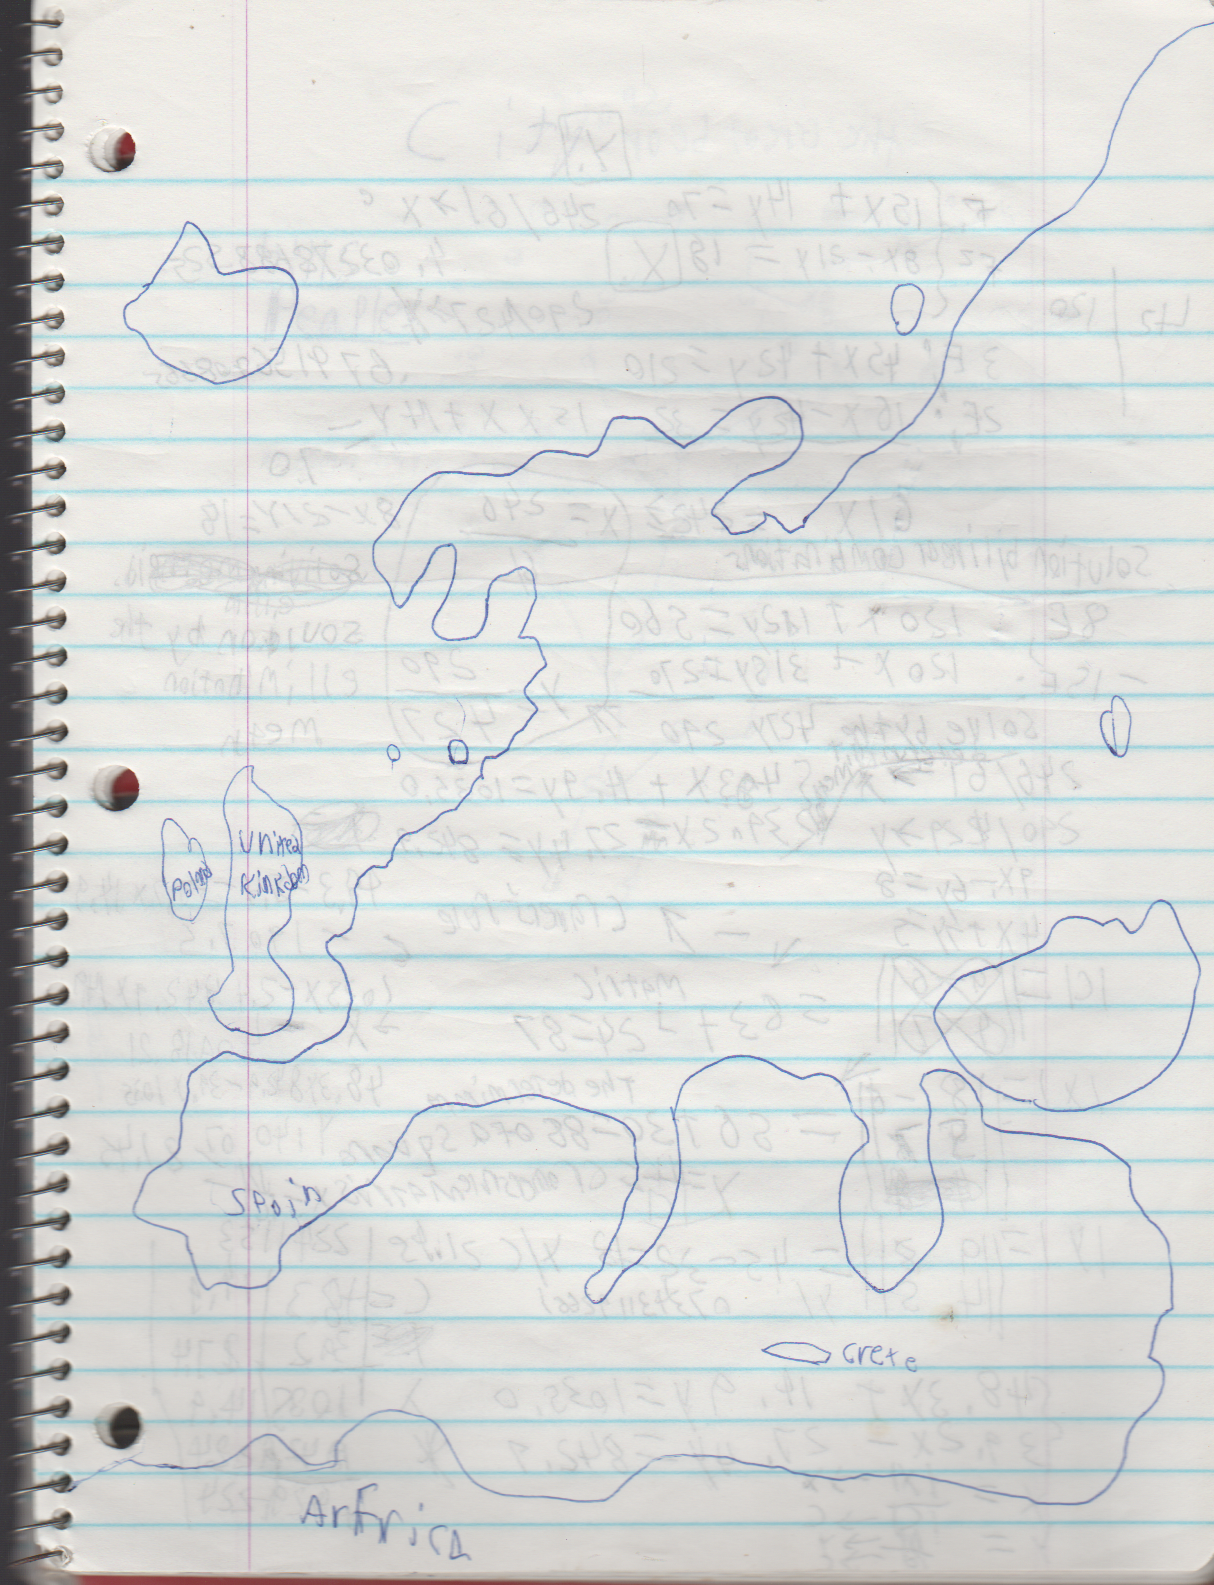 1996-08-18 - Saturday - 11 yr old Joey Arnold's School Book, dates through to 1998 apx, mostly 96, Writings, Drawings, Etc-035.png